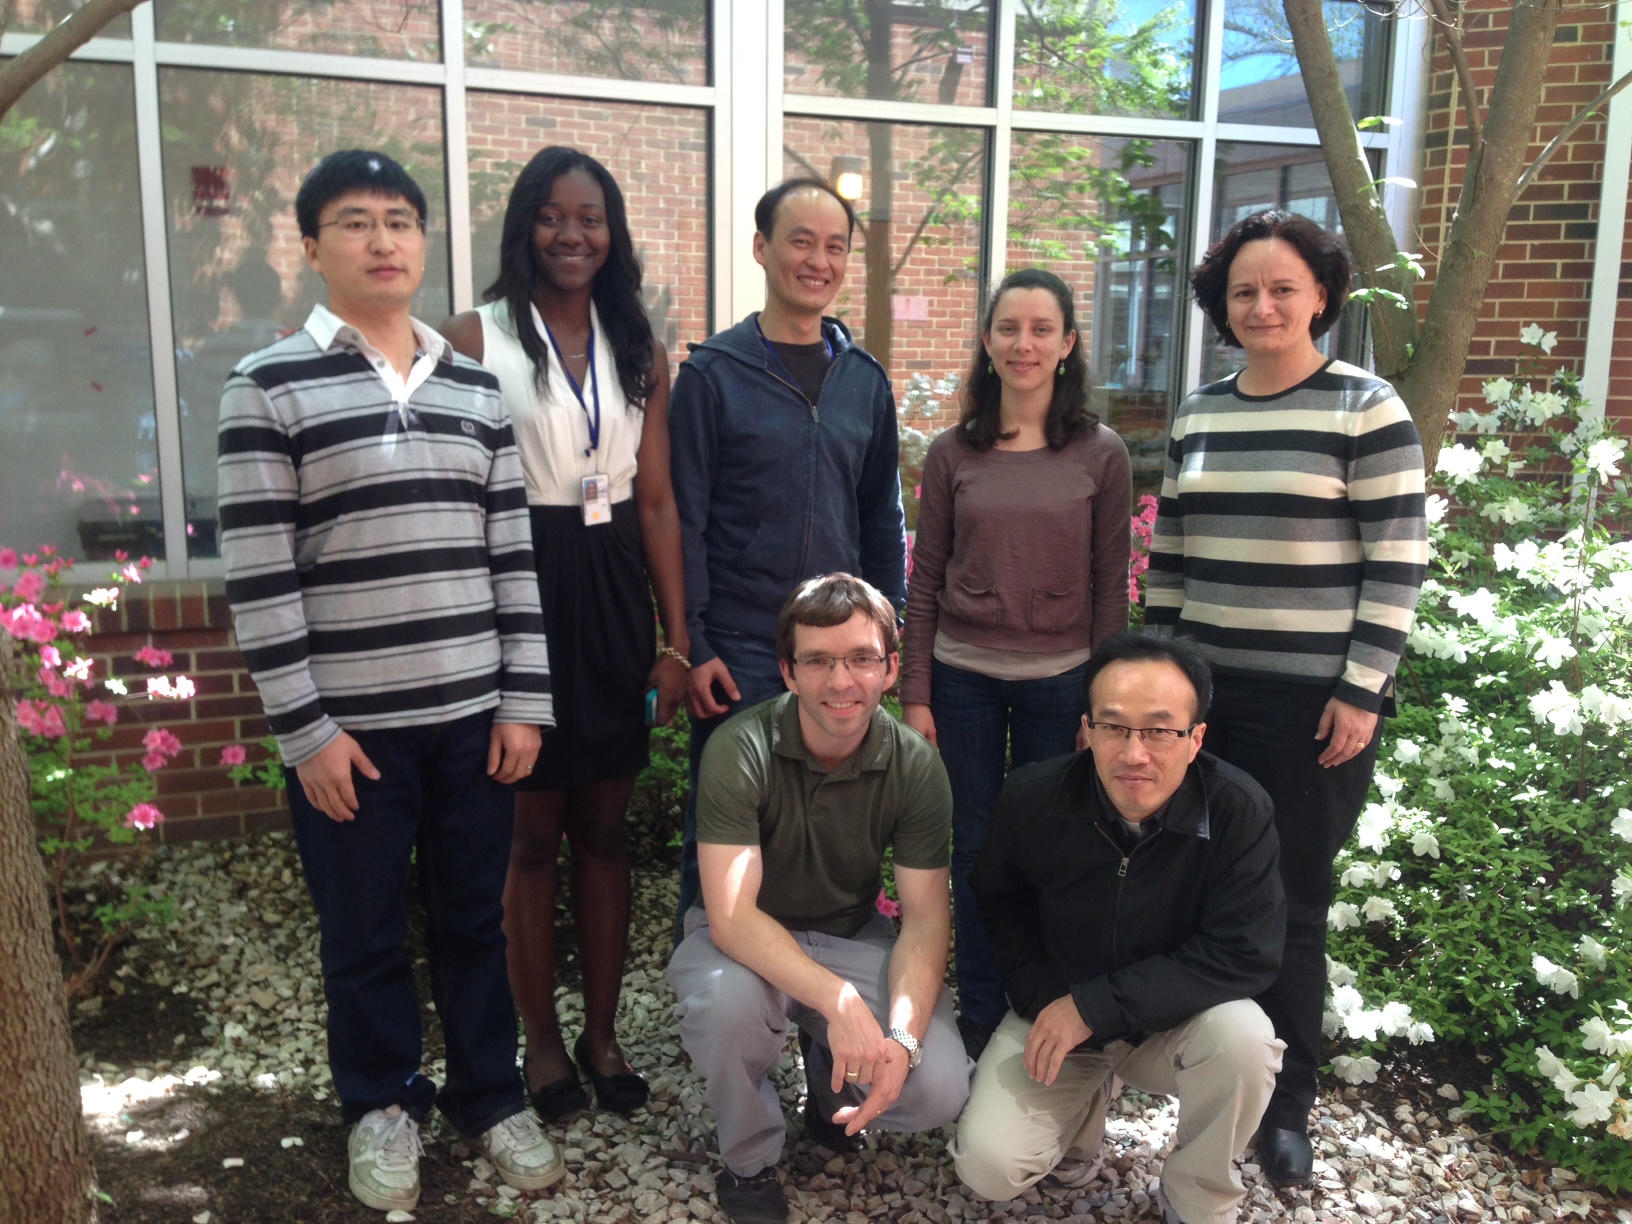 Serpe lab group photo from spring 2013